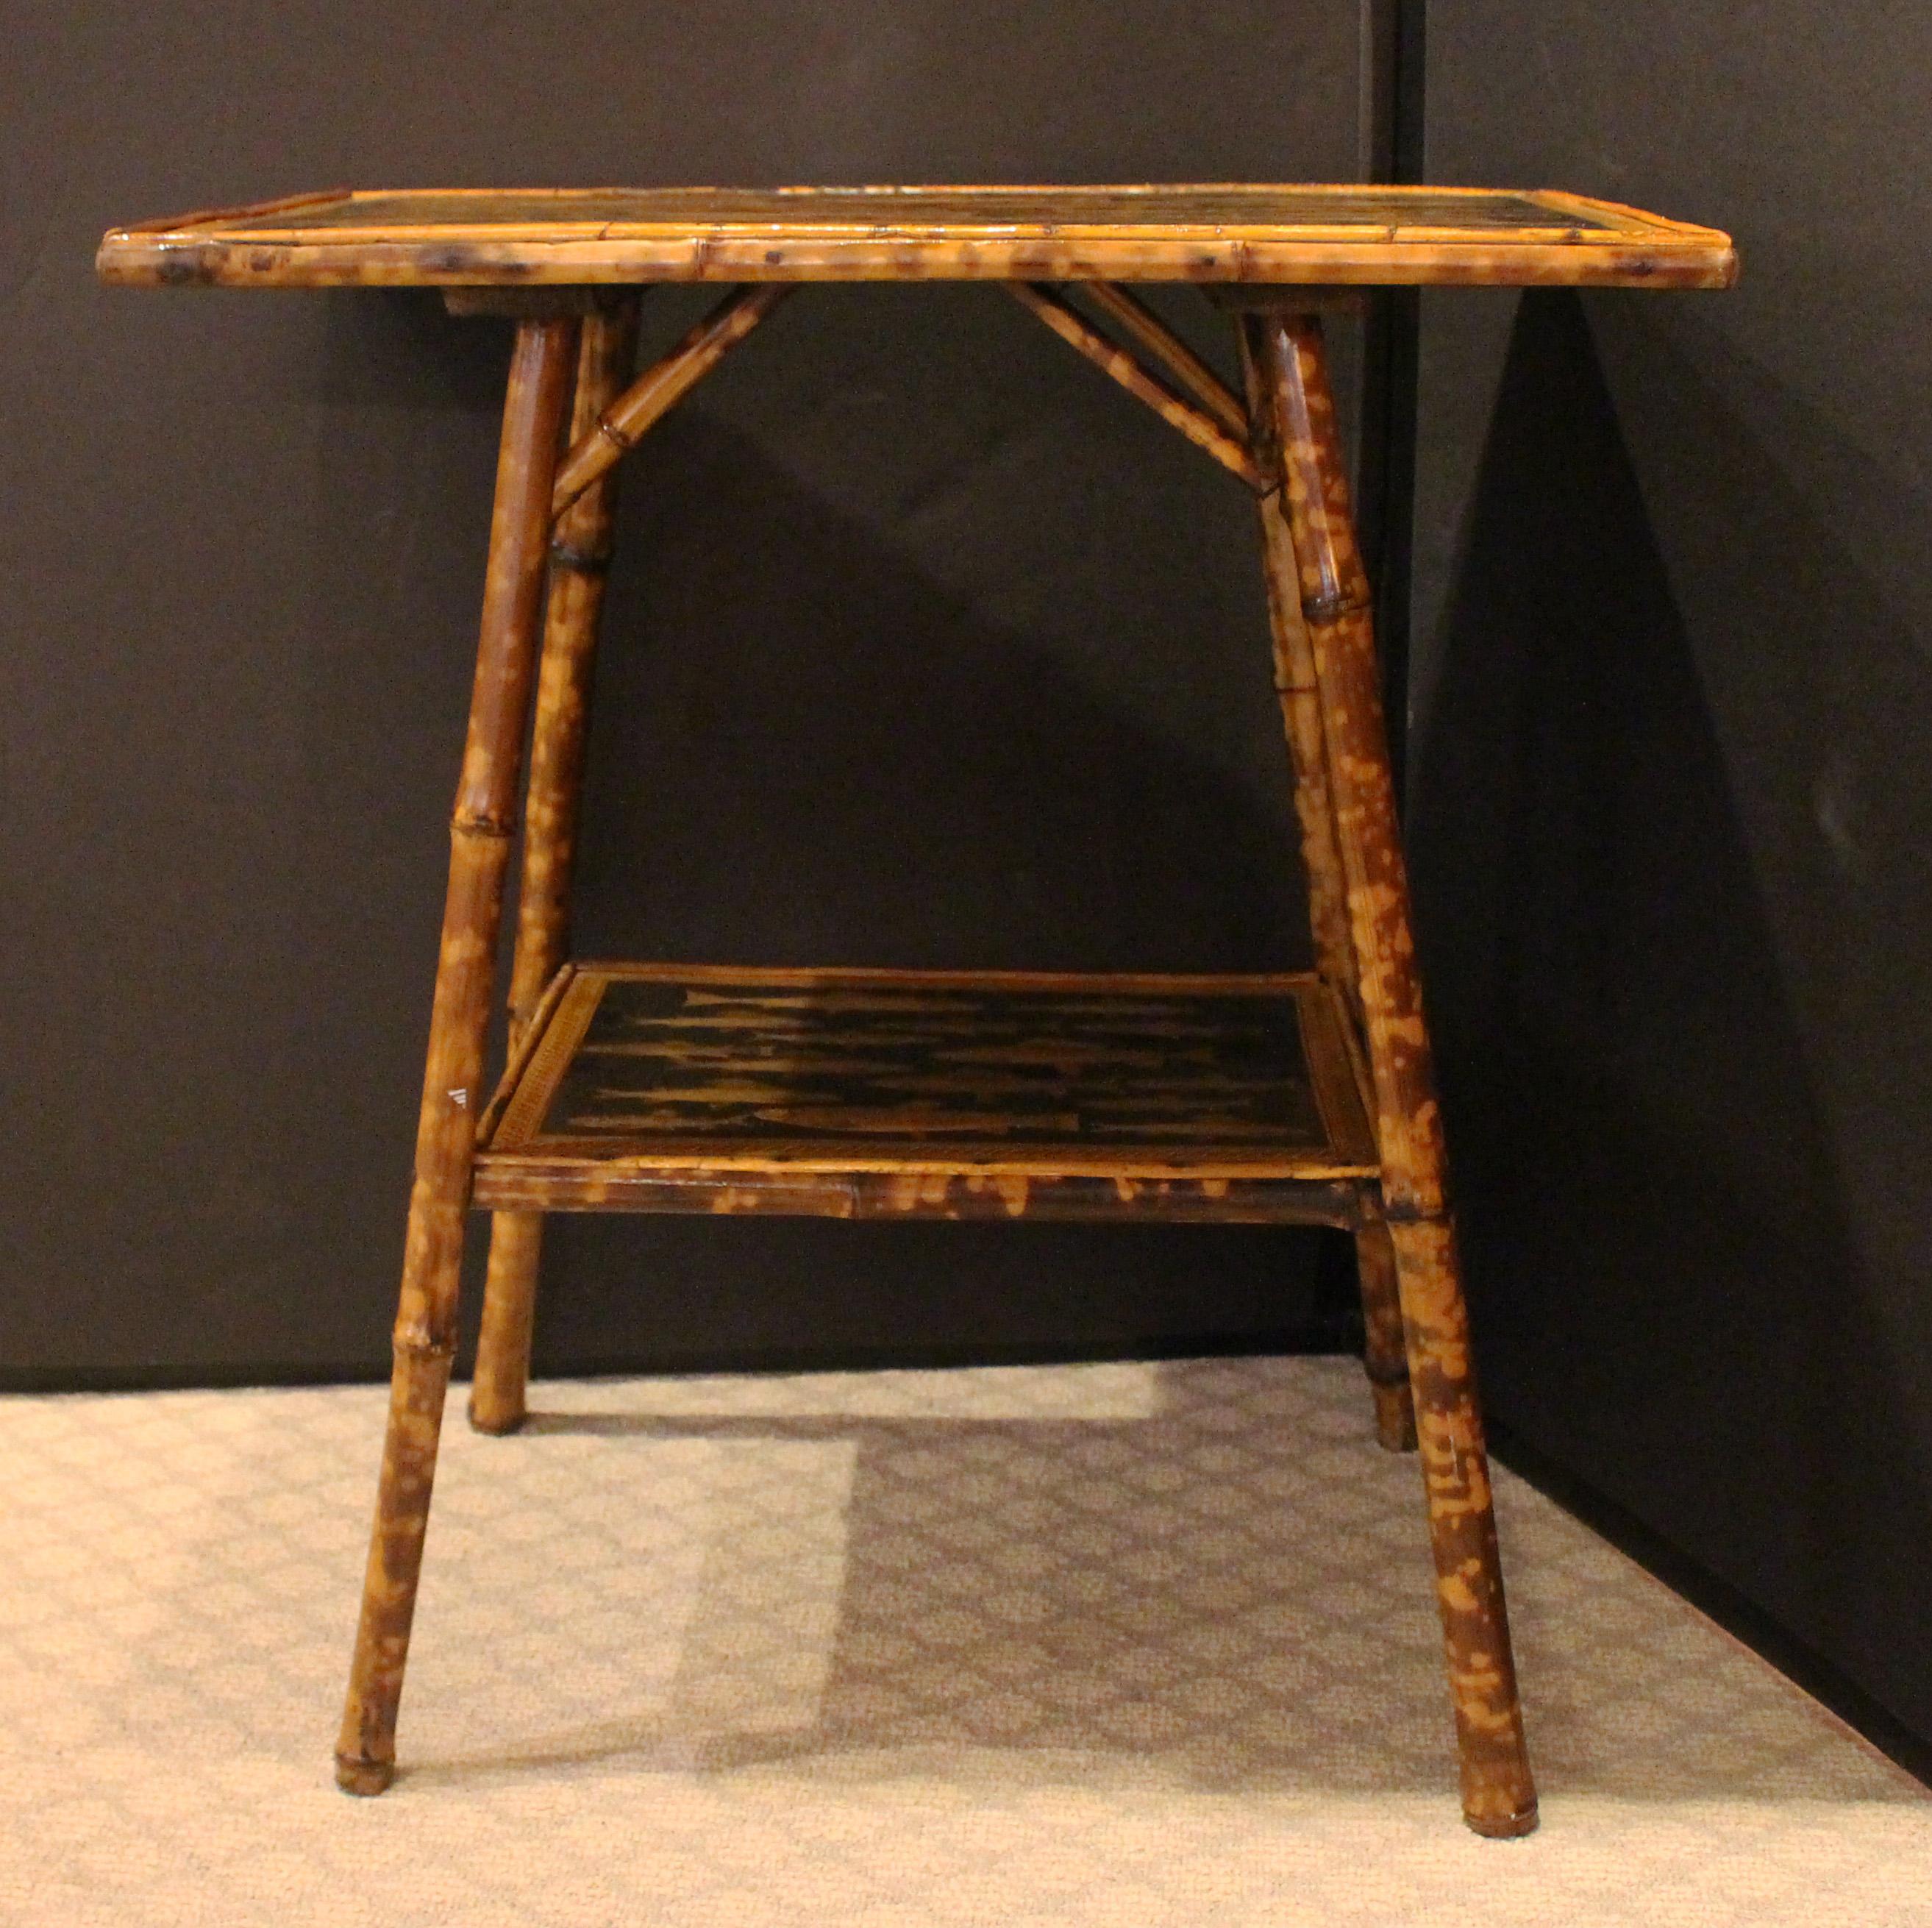 Circa 1880 English large size 2-tier rectangular bamboo side table. Now decoupaged with fish. Well figured bamboo.
23.25